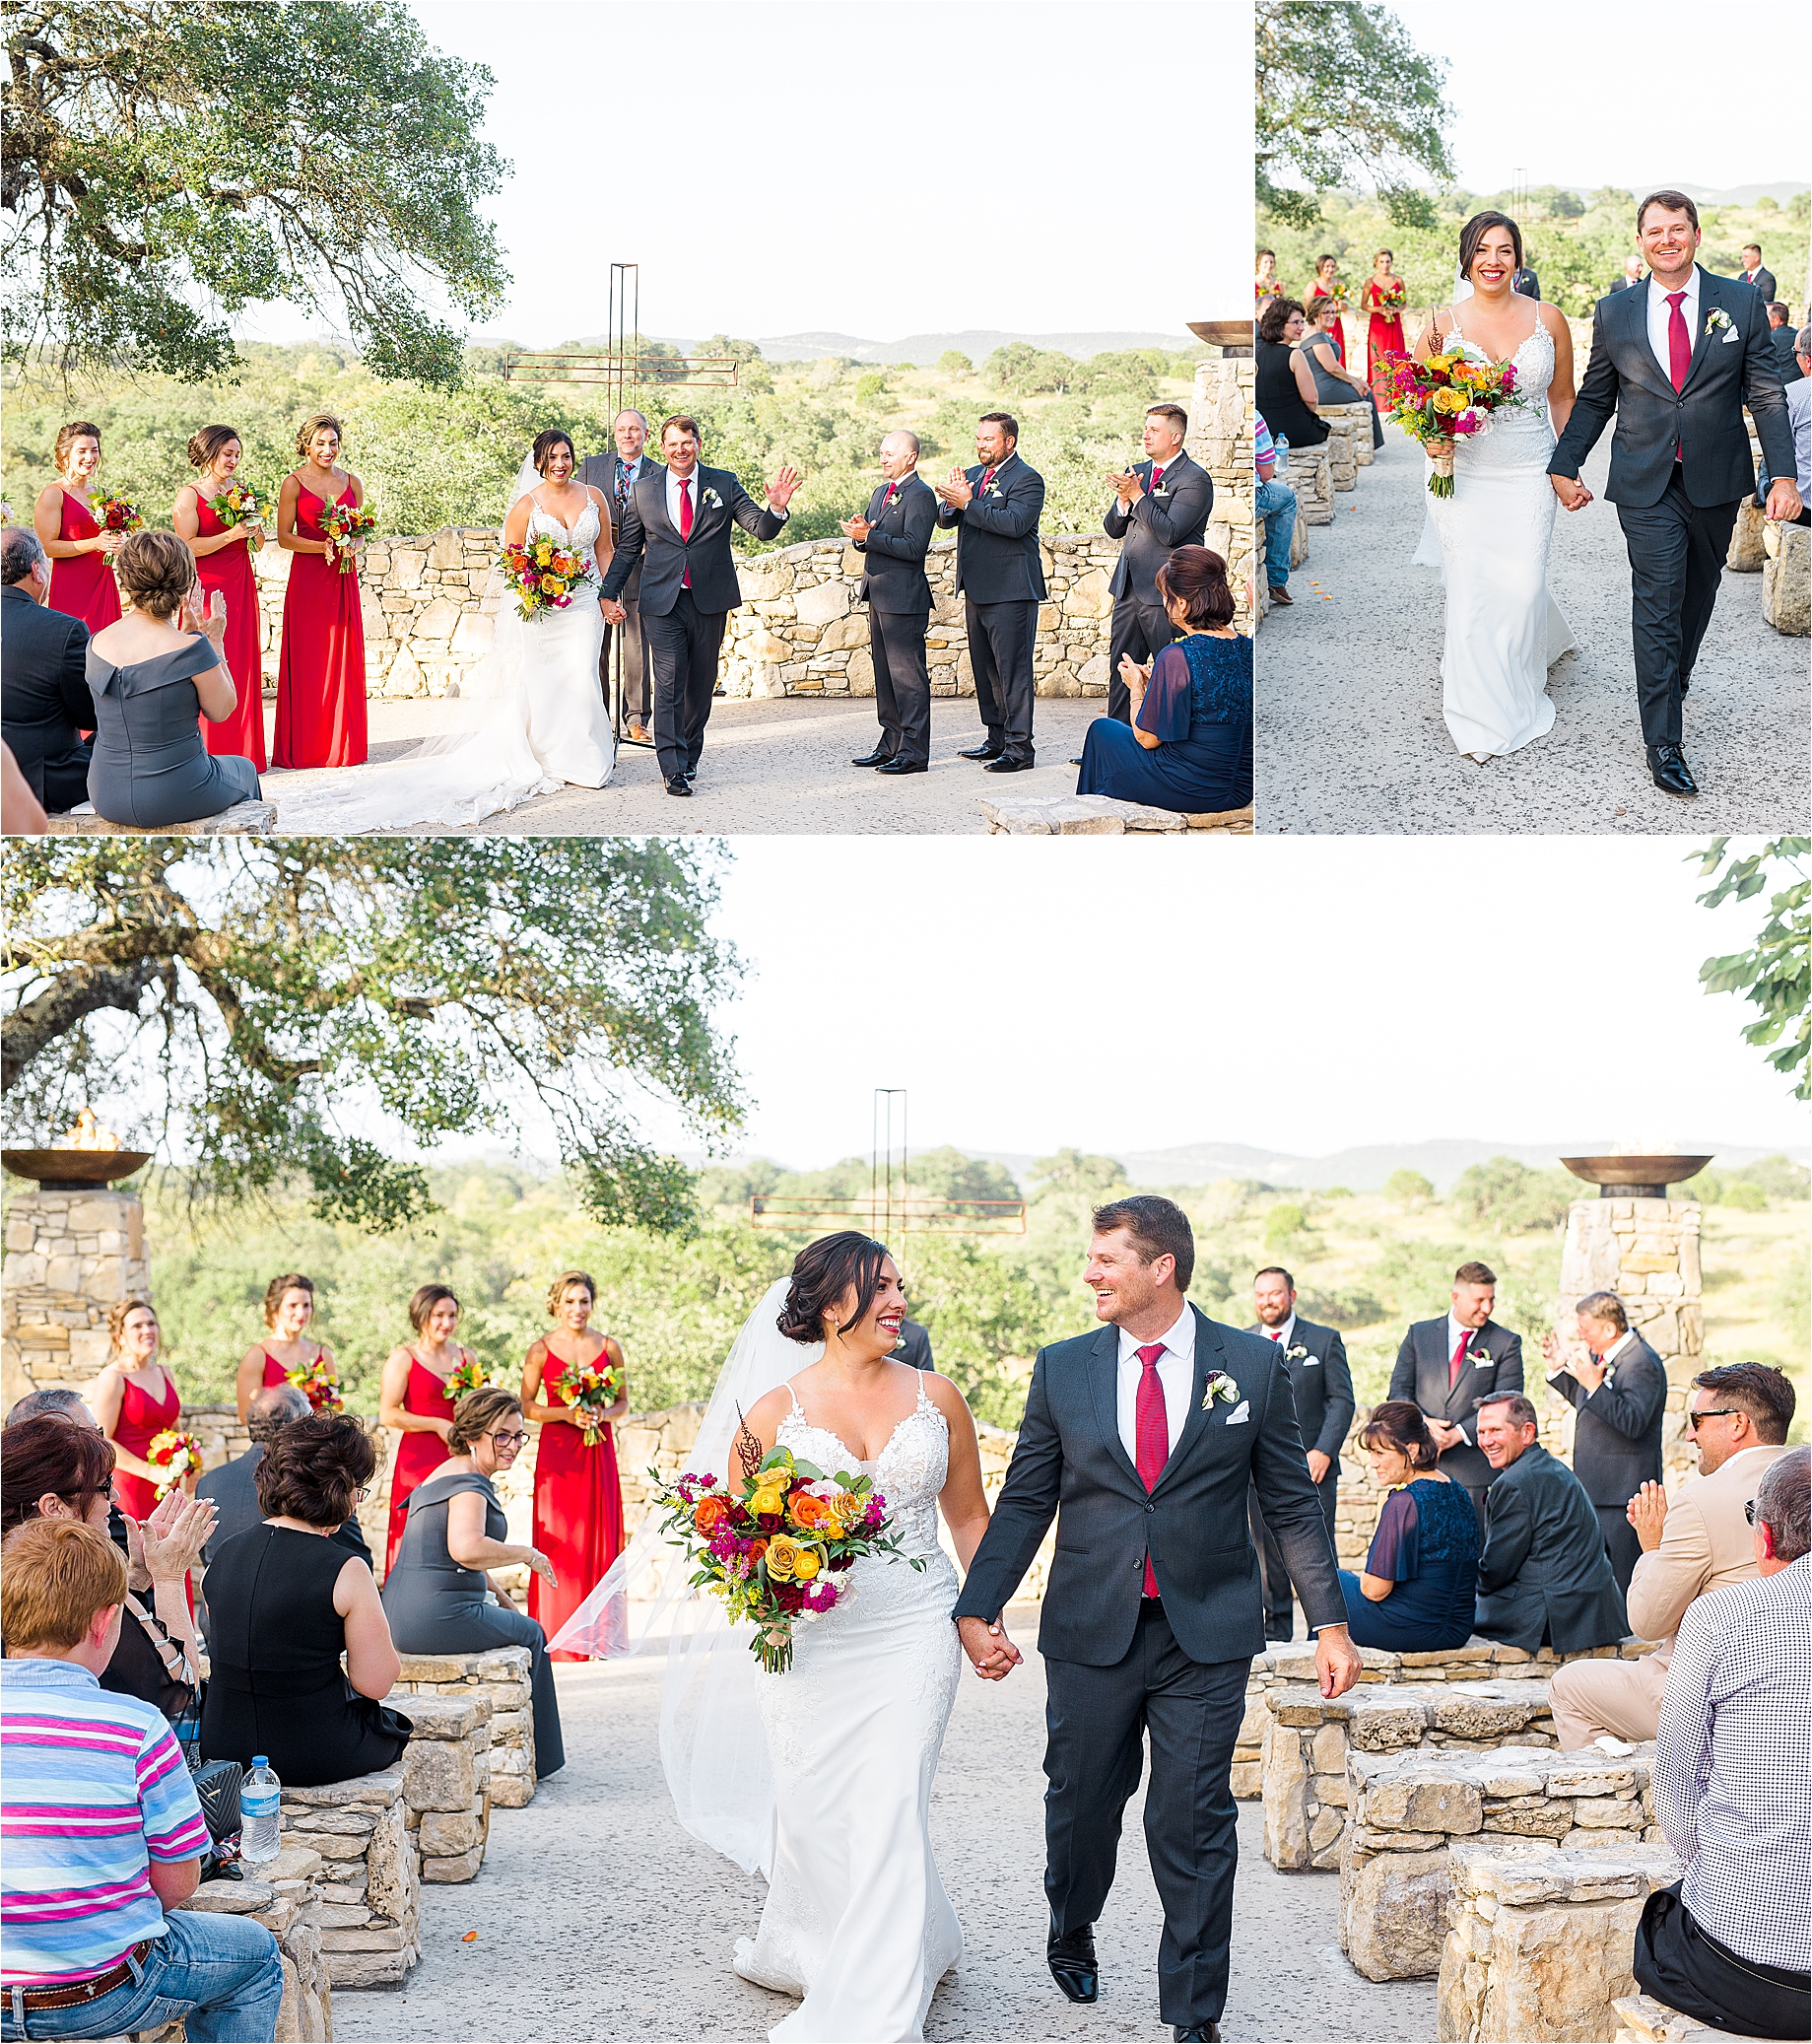 A bride and groom celebrate as they walk down the aisle at Paniolo Ranch as husband and wife